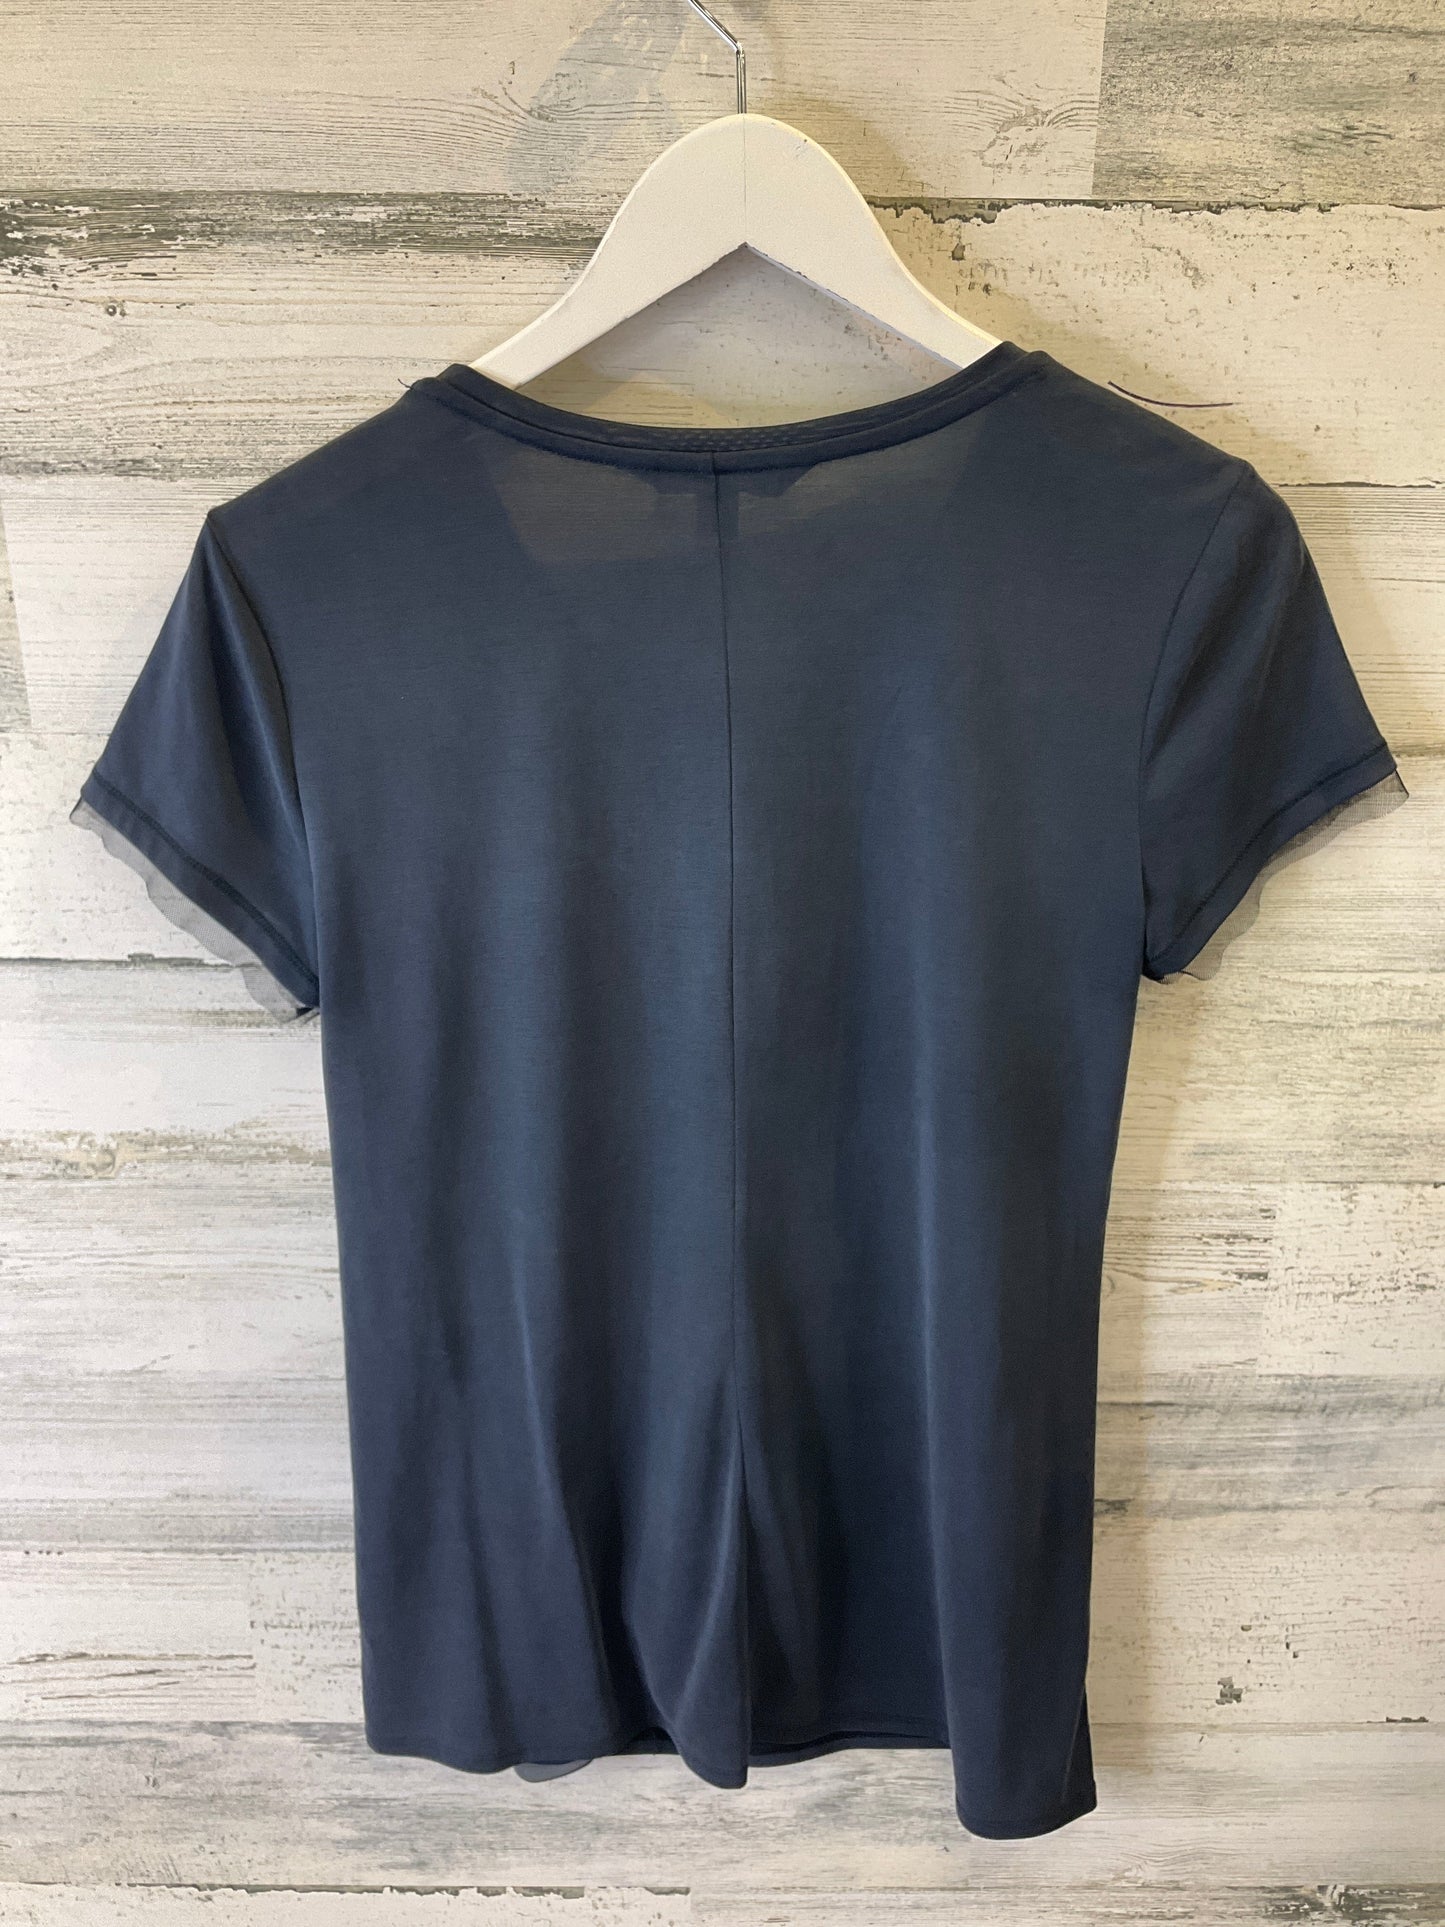 Blue Top Short Sleeve Simply Vera, Size S